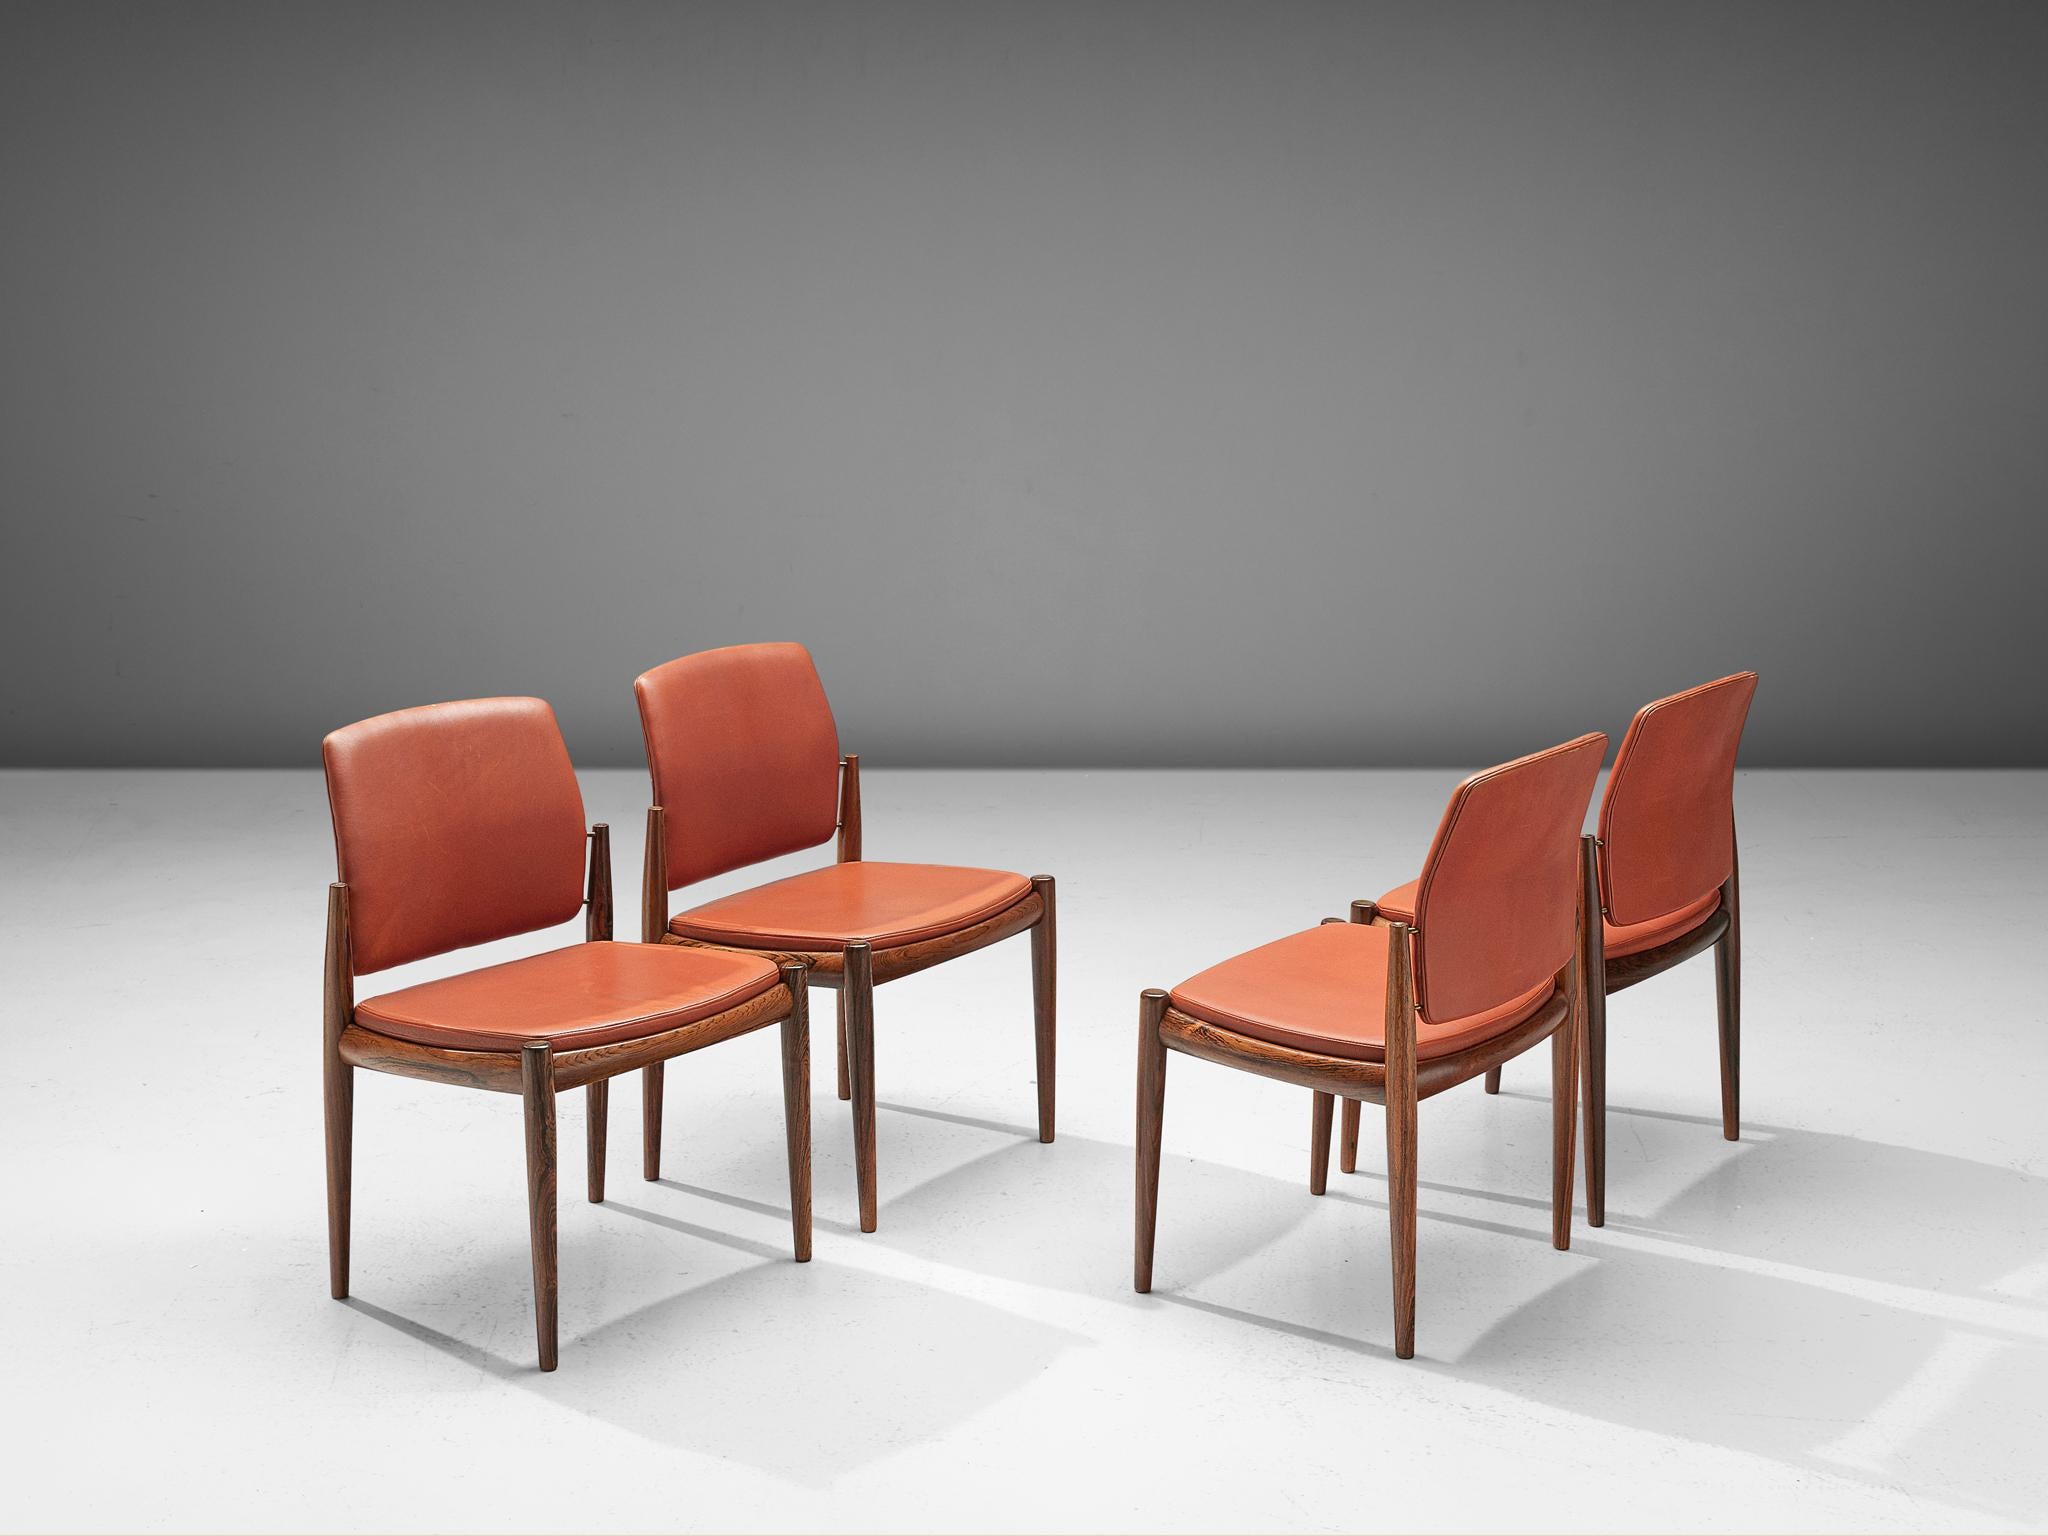 Four dining chairs, rosewood and leather, Denmark, 1960s

This set of dining chairs is functional and well-made. The set exists of four chairs and is executed with a rosewood, modest frame. The lining of these well-executed chairs is beautifully